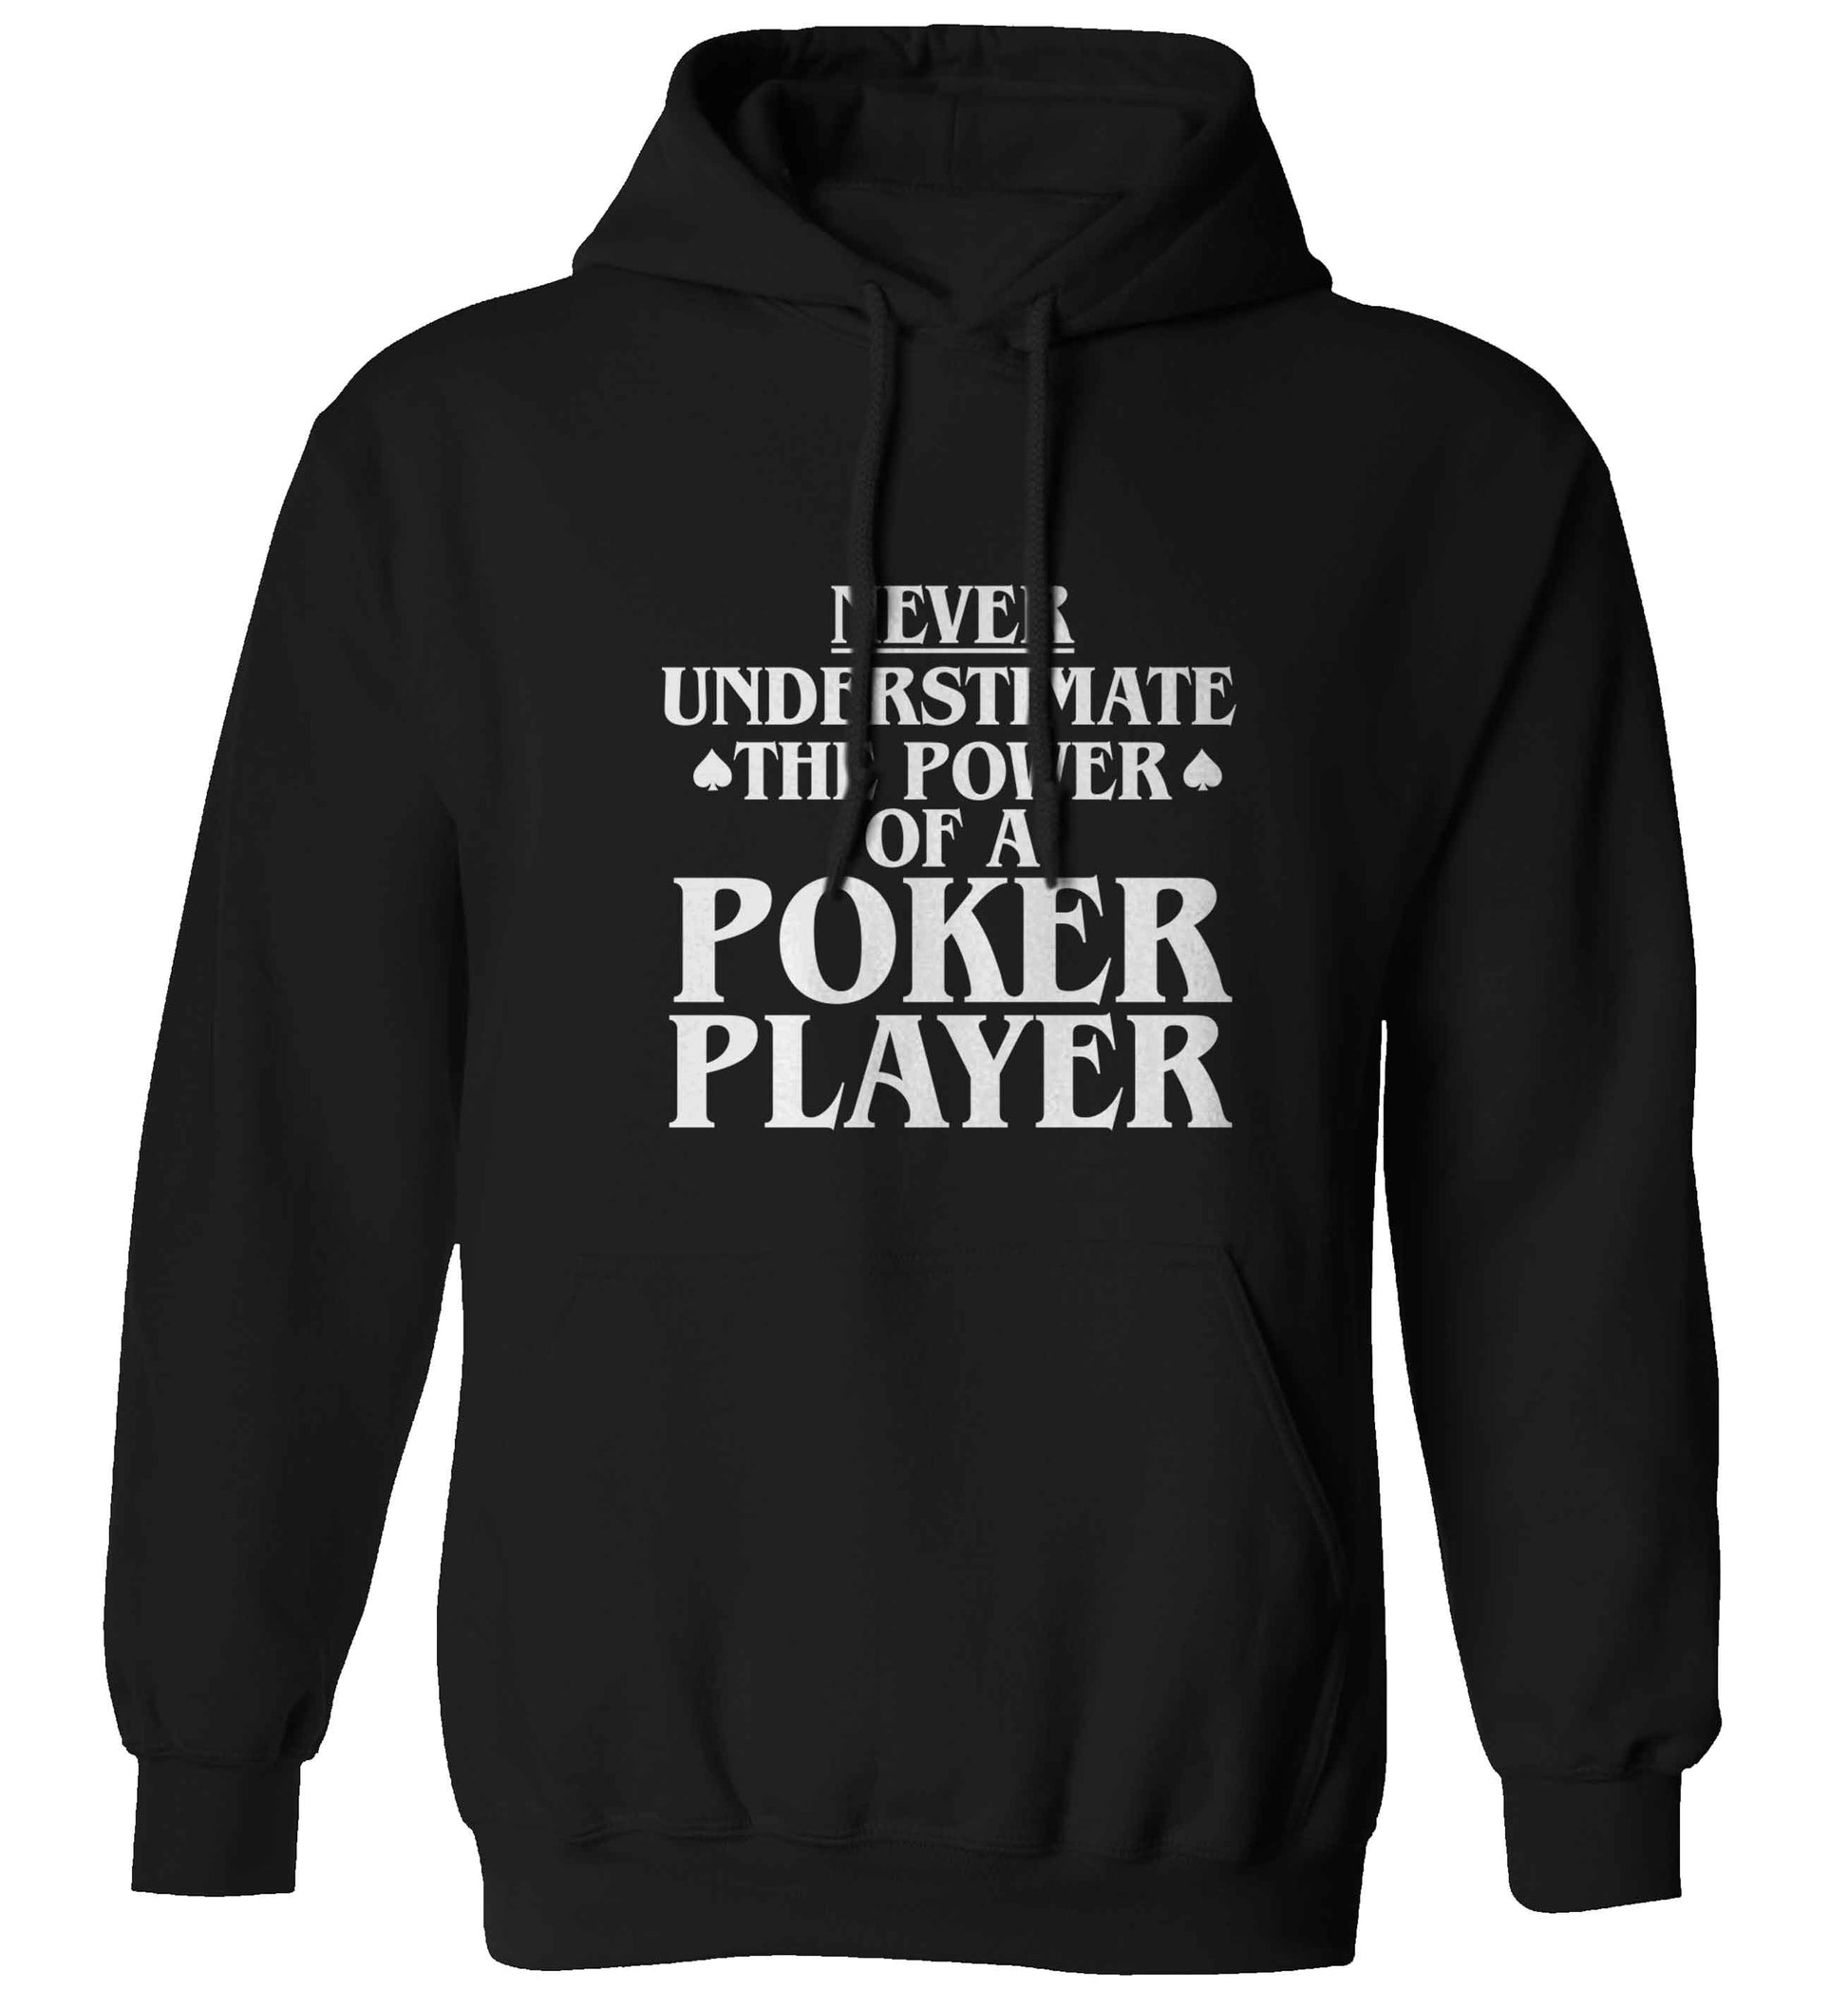 Never understimate the power of a poker player adults unisex black hoodie 2XL